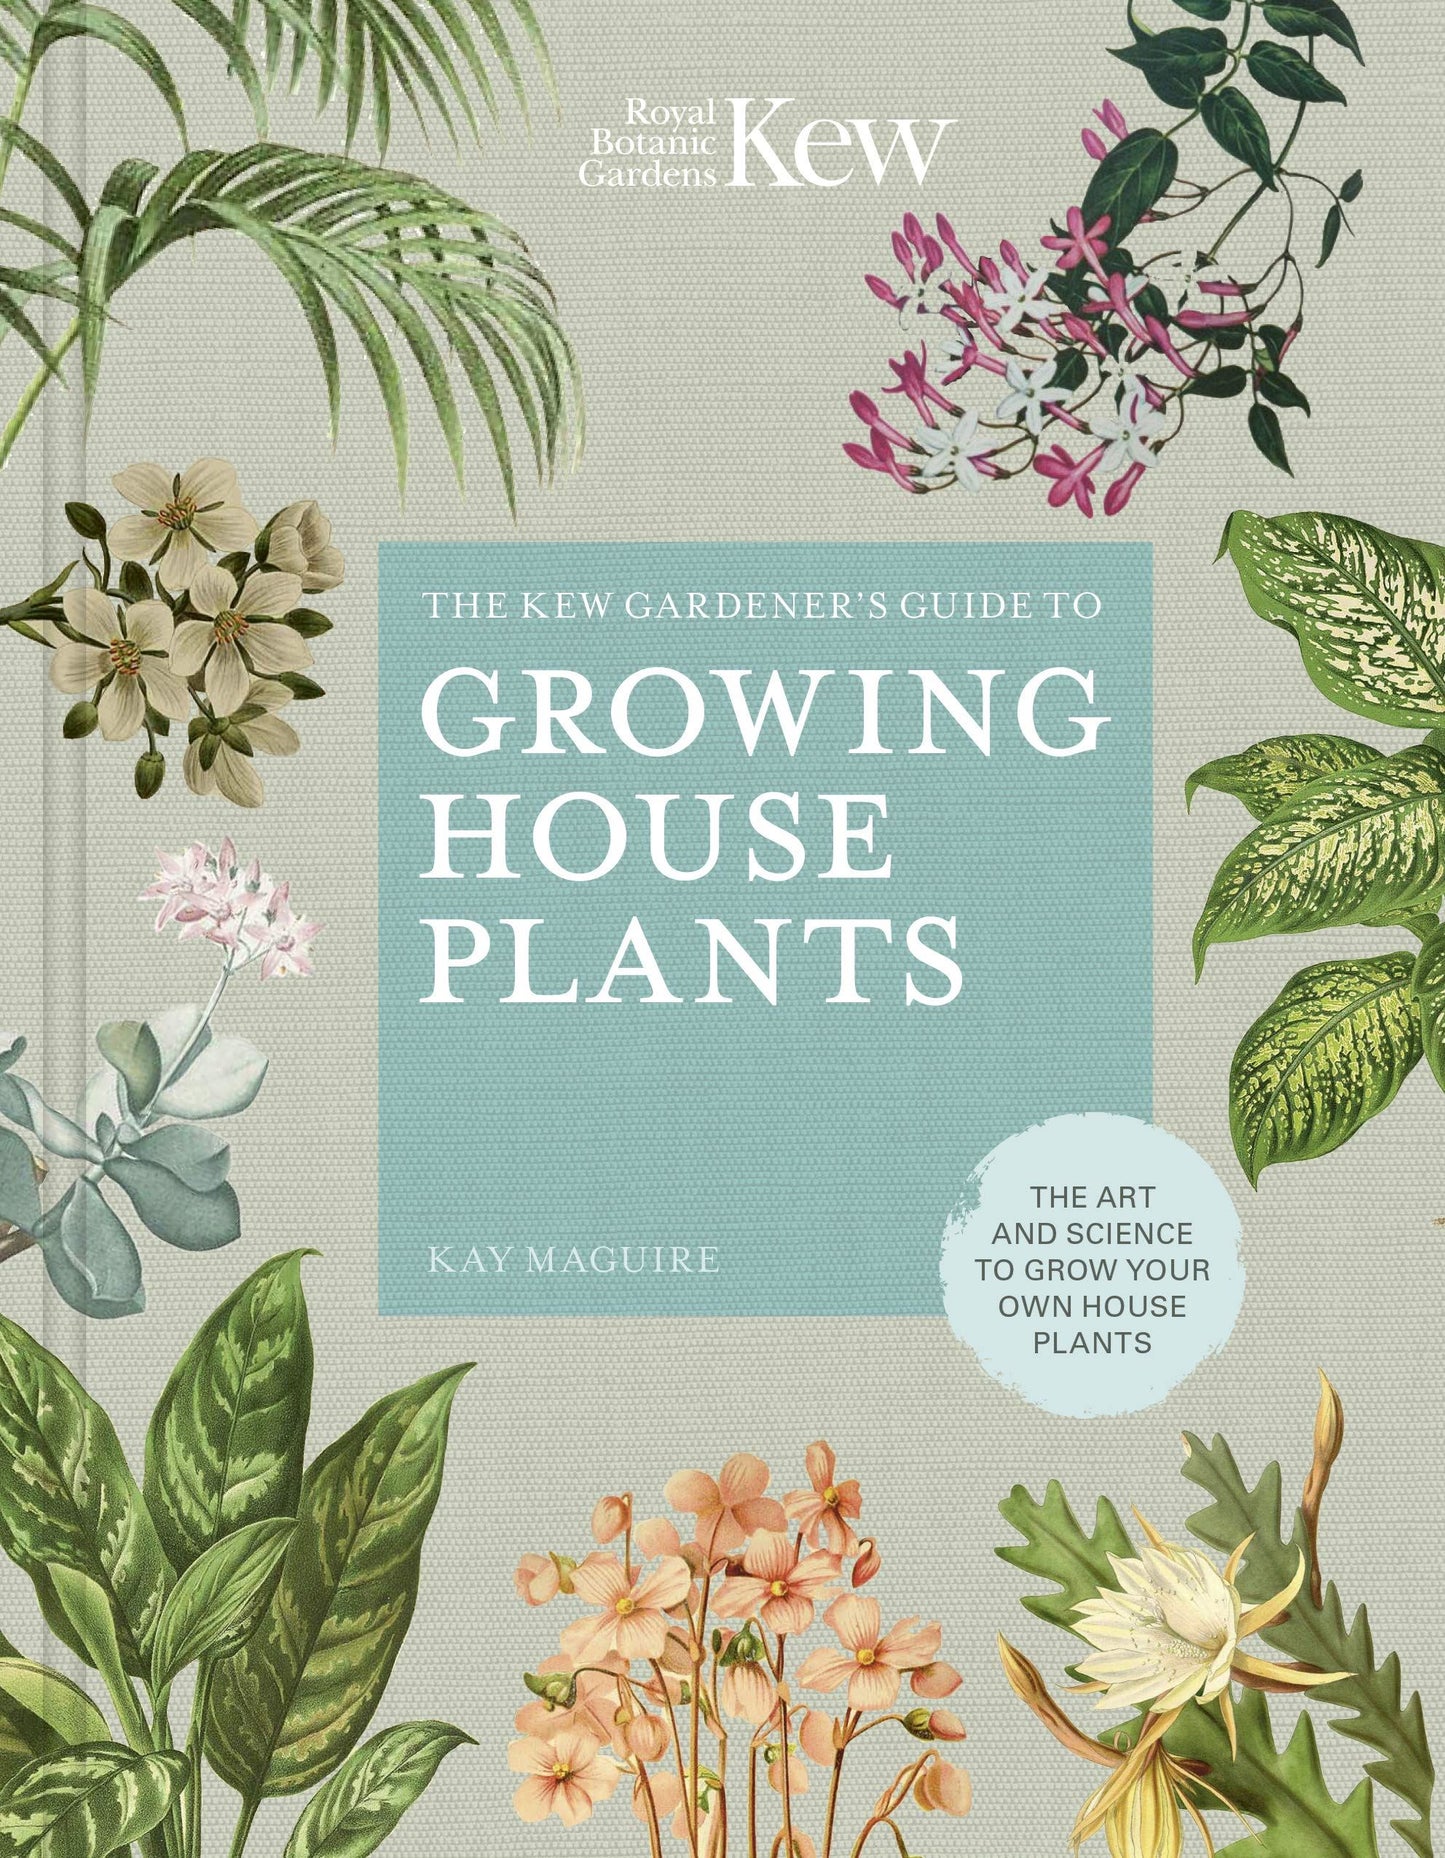 Kew's Guide to Growing House Plants